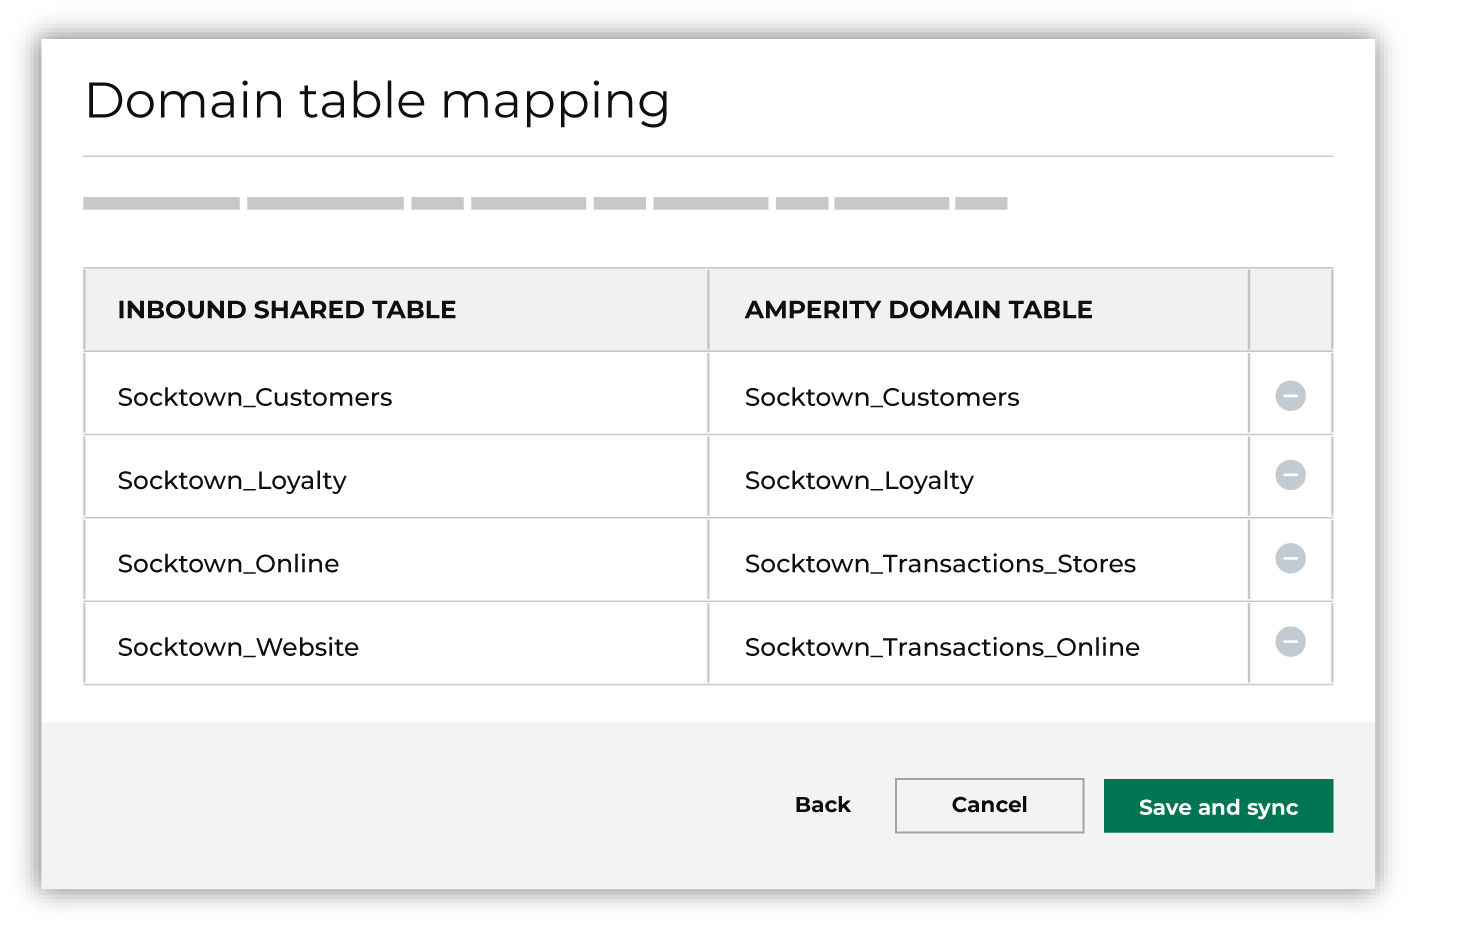 Map inbound shared tables to domain tables.